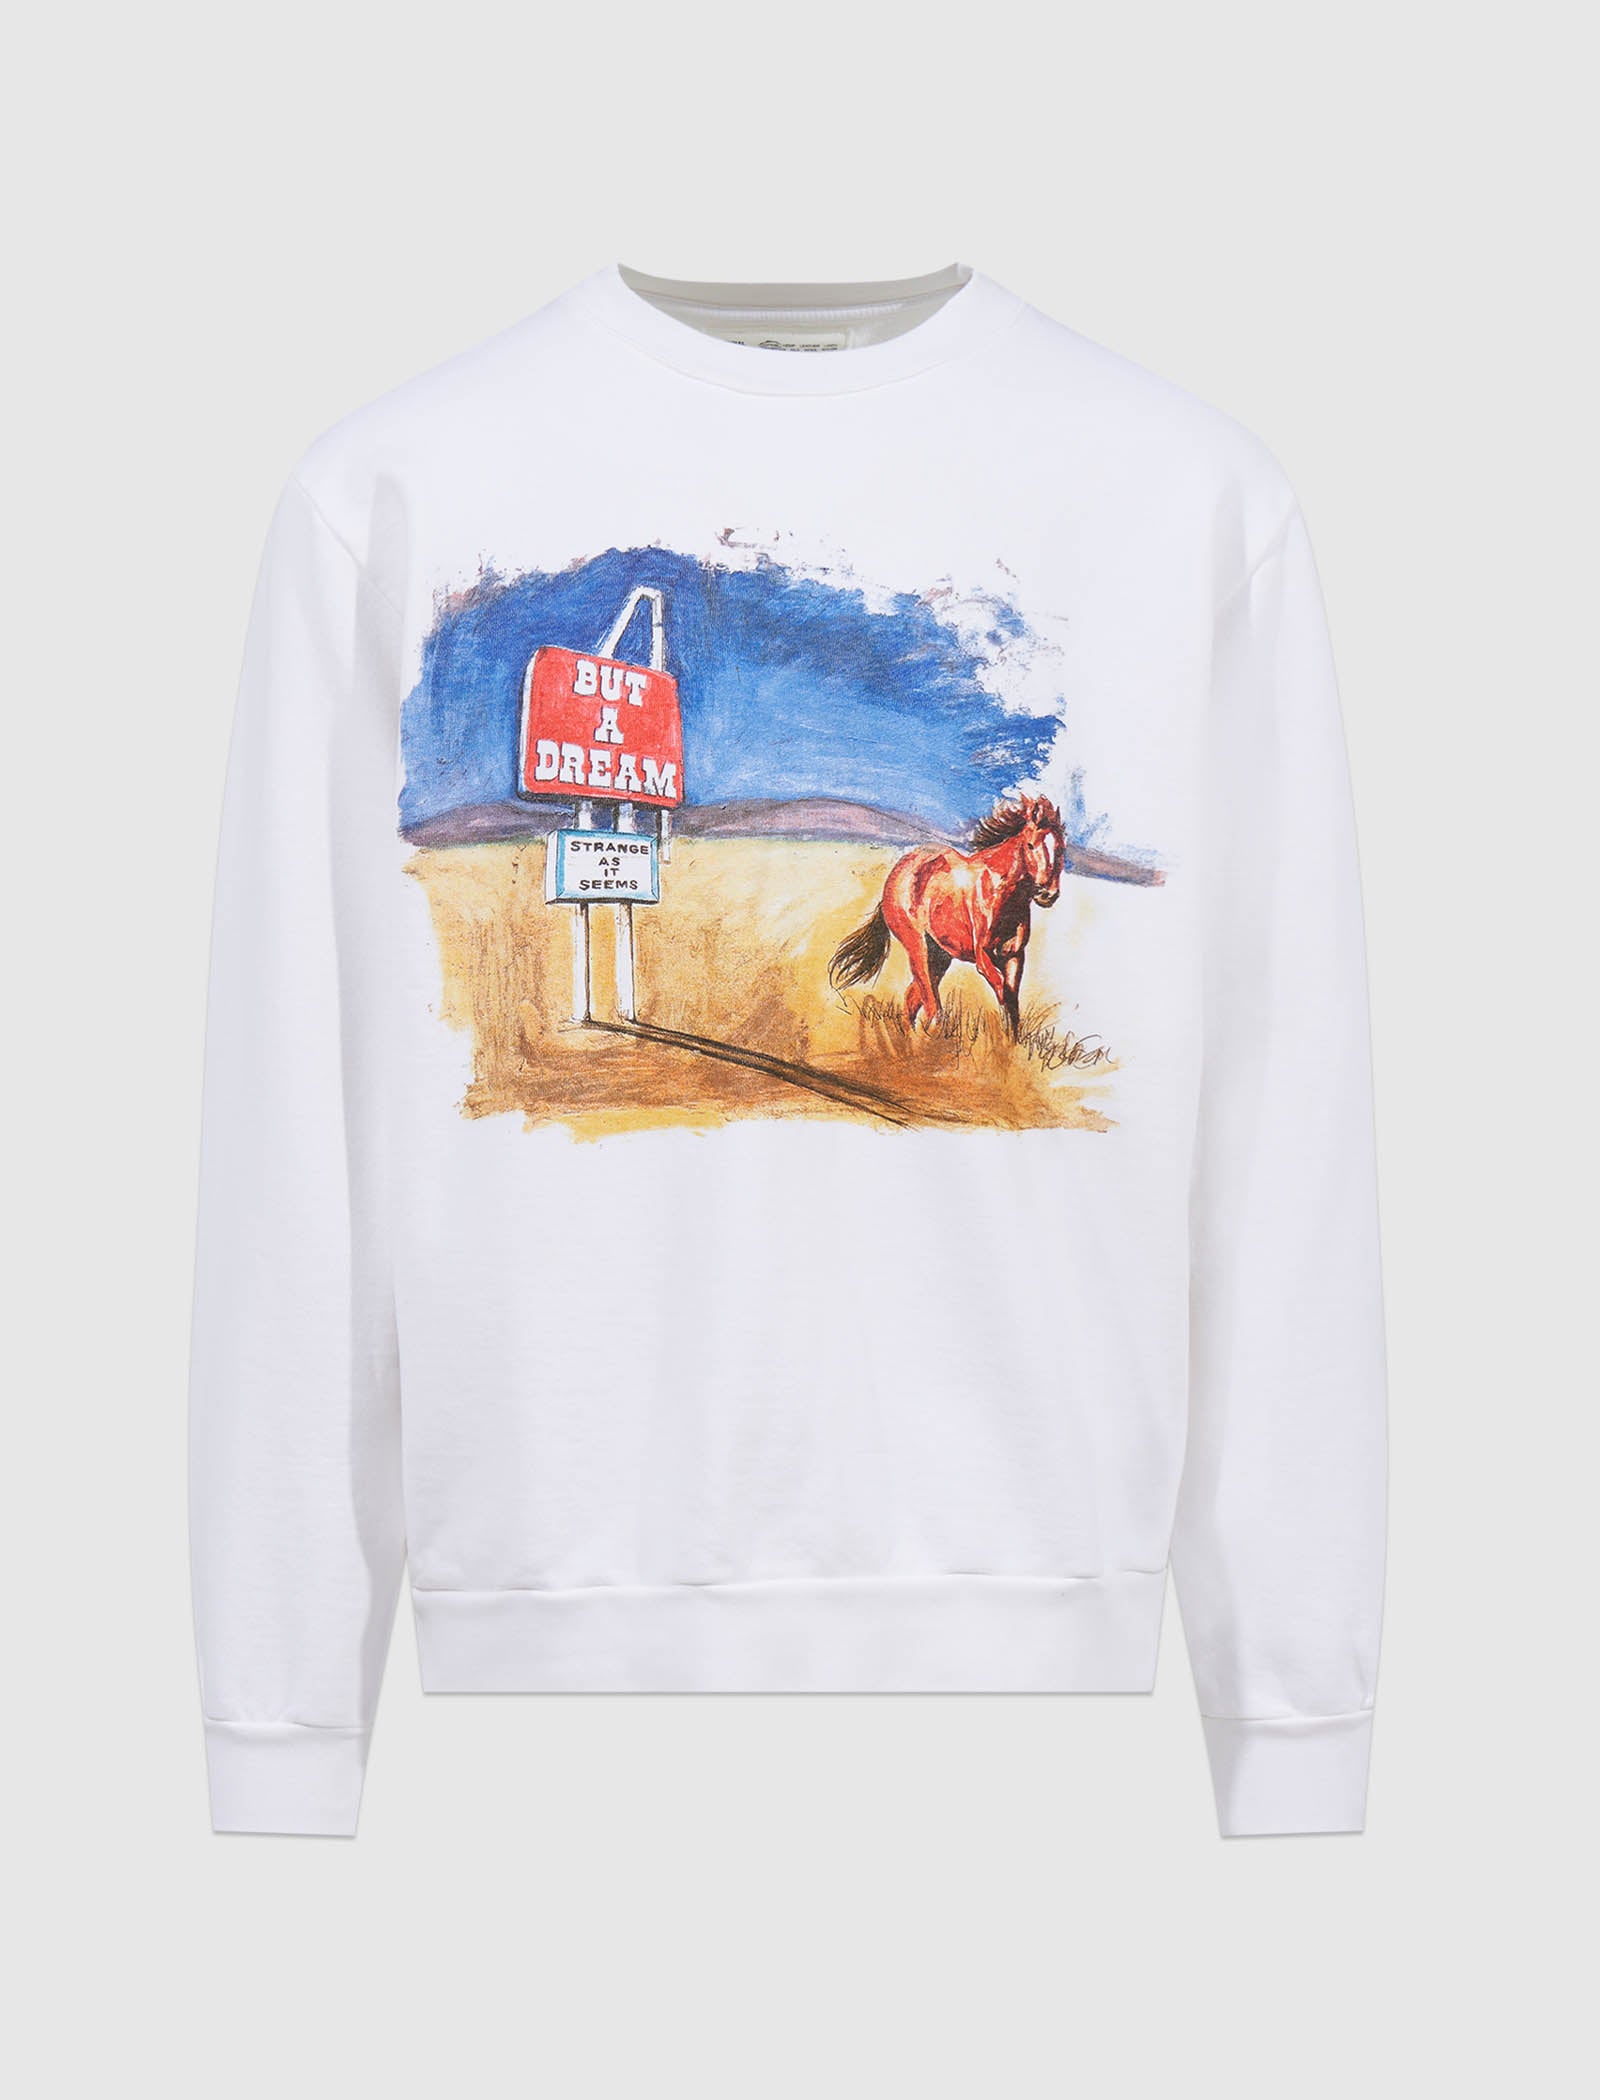 ONE OF THESE DAYS BUT A DREAM CREWNECK